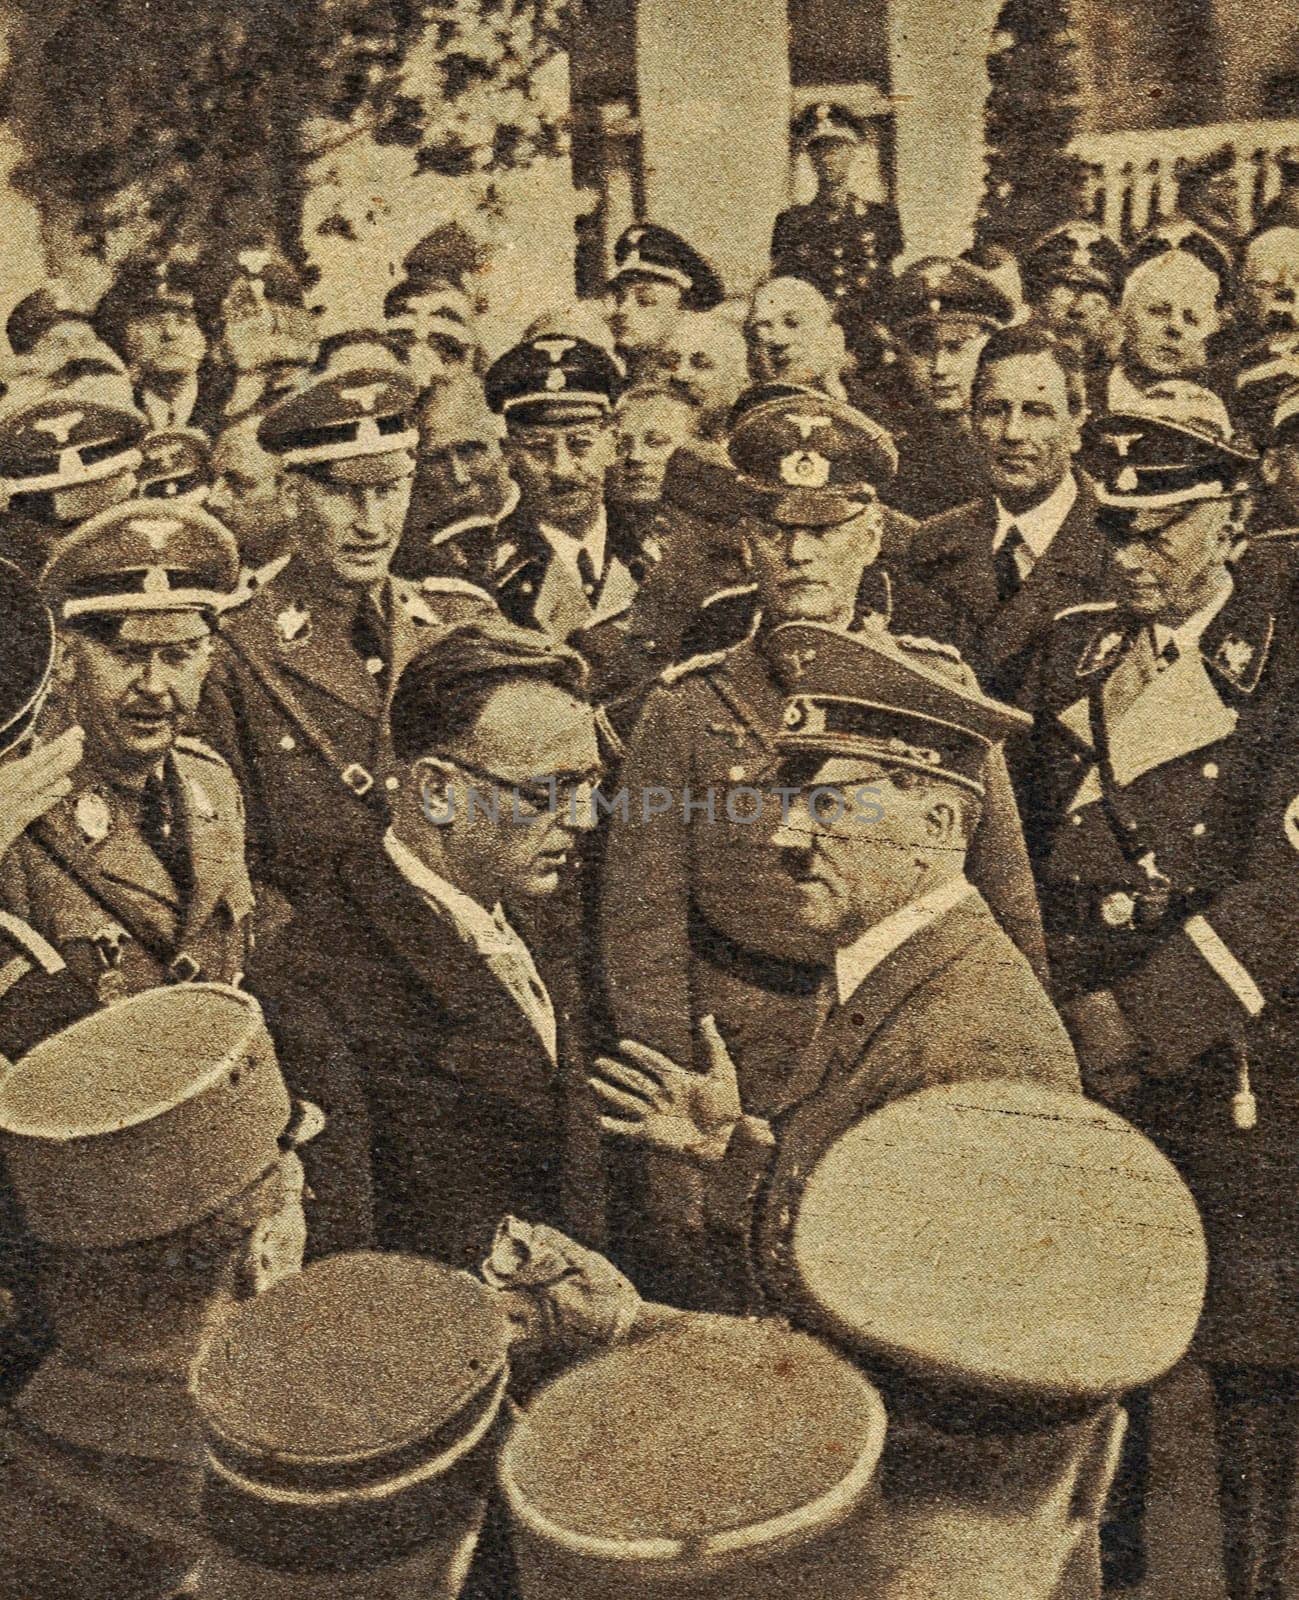 Arthur Seyss-Inquart with Adolf Hitler . Seyss-Inquart drafted the legislative act reducing Austria to a province of Germany and signed it into law on 13 March. With Hitler's approval he became Governor Reichsstatthalter of the newly named Ostmark, thus becoming Hitler's personal representative in Austria. by roman_nerud